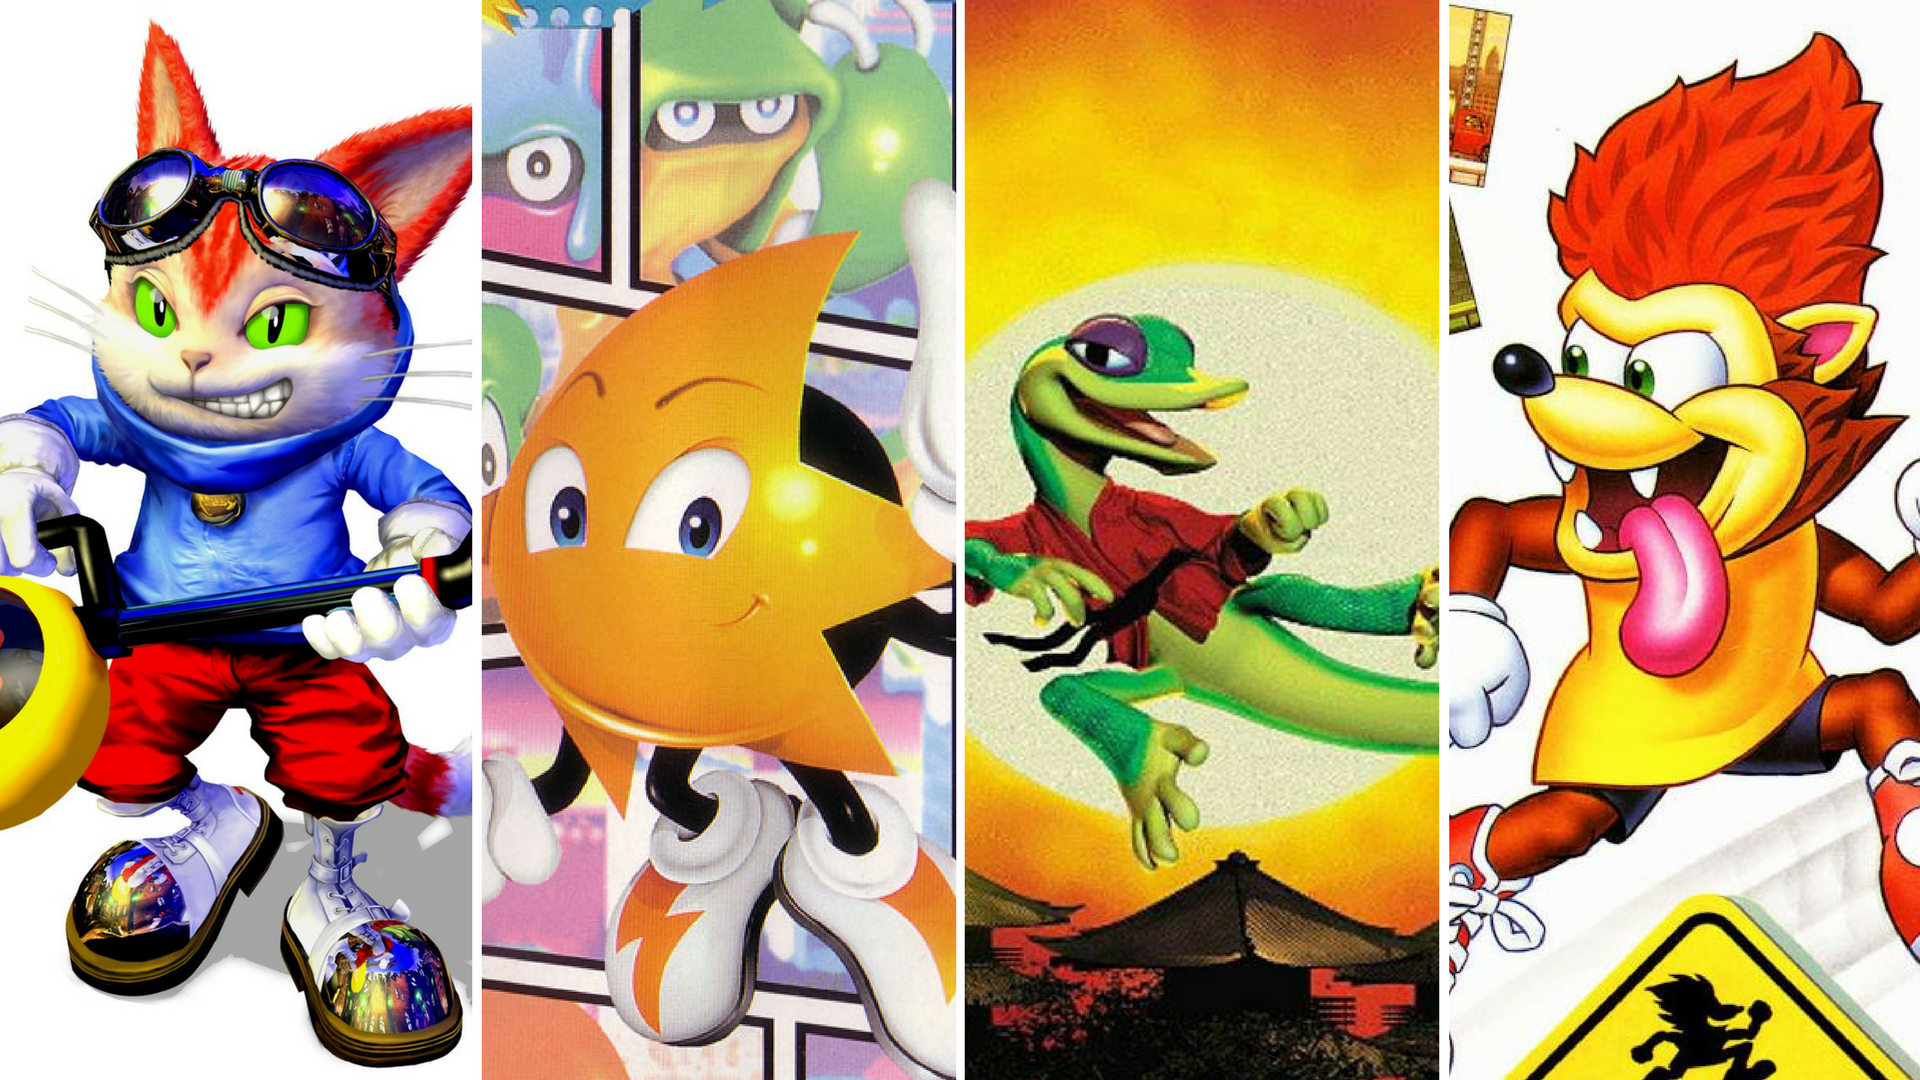 Chances Are You Can’t Name These 10 Forgotten Gaming Mascots